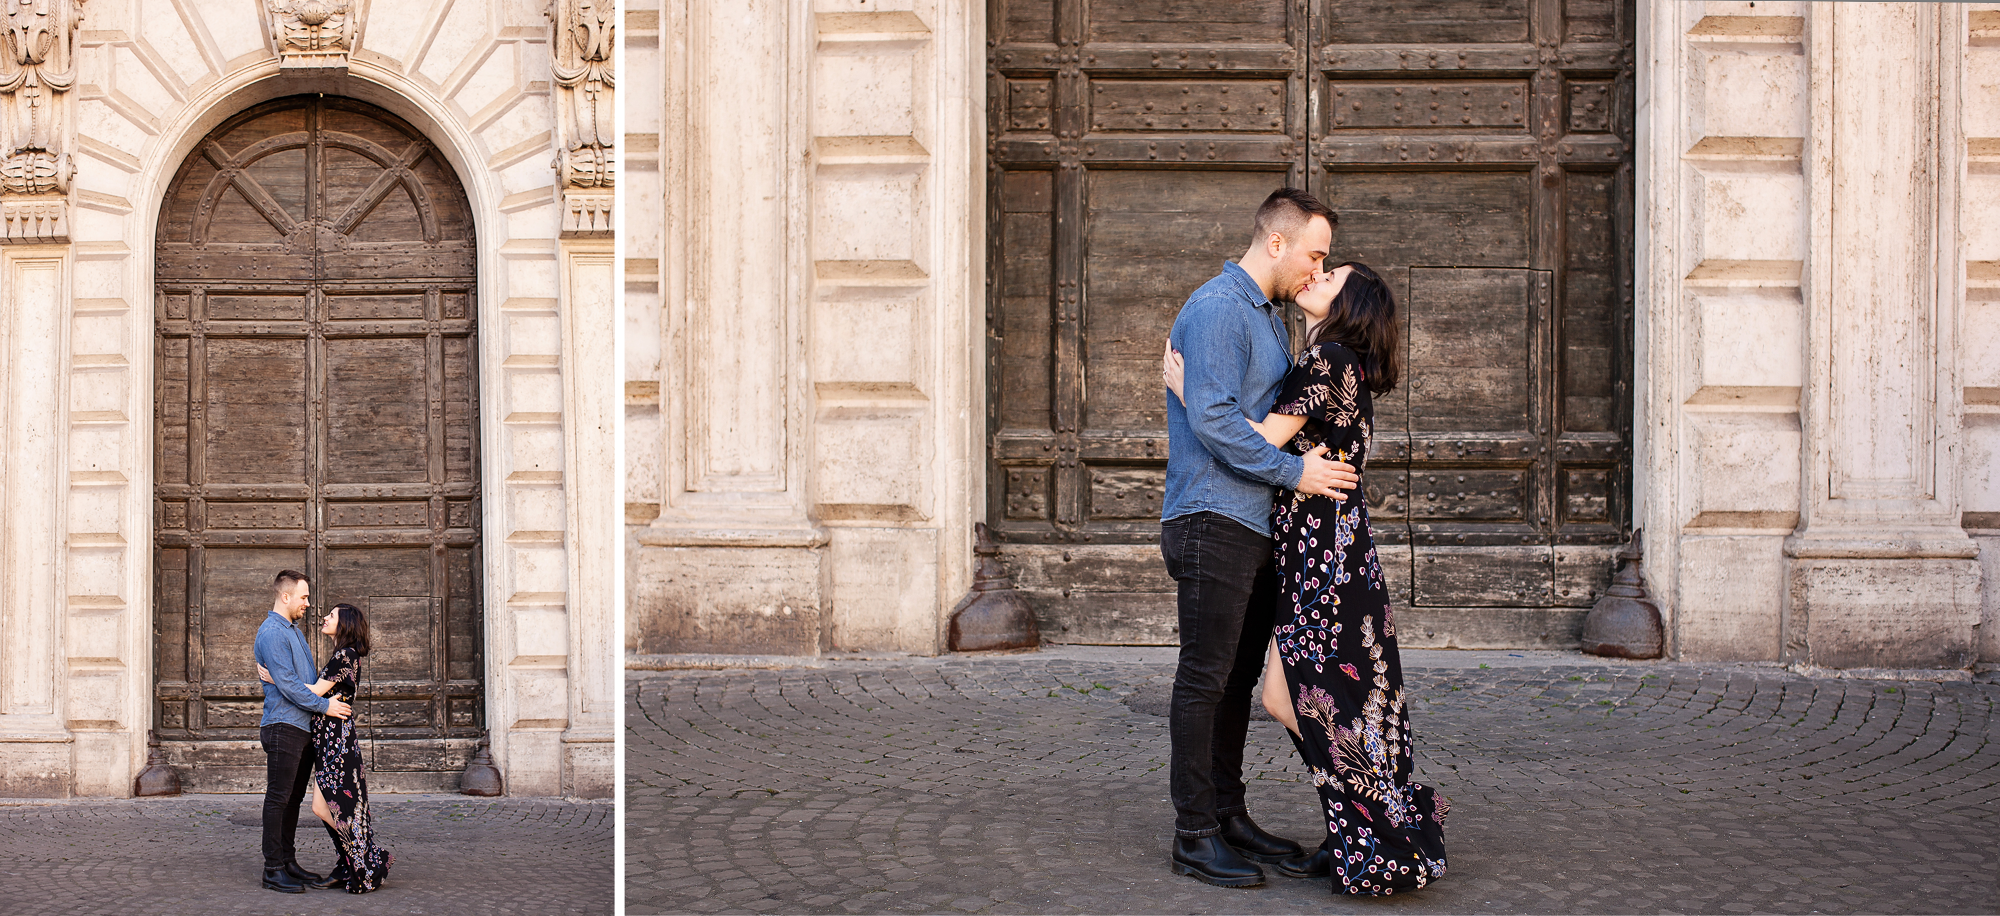 Honeymoon, vacation, family, engagement, maternity, wedding, love story individual and solo photoshoots in Rome, Italy by photographer Tricia Anne Photography | Rome Photographer, vacation, tripadvisor, instagram, fun, married, bride, groom, love story, photography session rome, photoshoot rome, wedding photographer, vacation photographer, engagement photo, honeymoon photoshoot, rome honeymoon, rome wedding, elopement in Rome, honeymoon photographer rome, maternity photo shoot